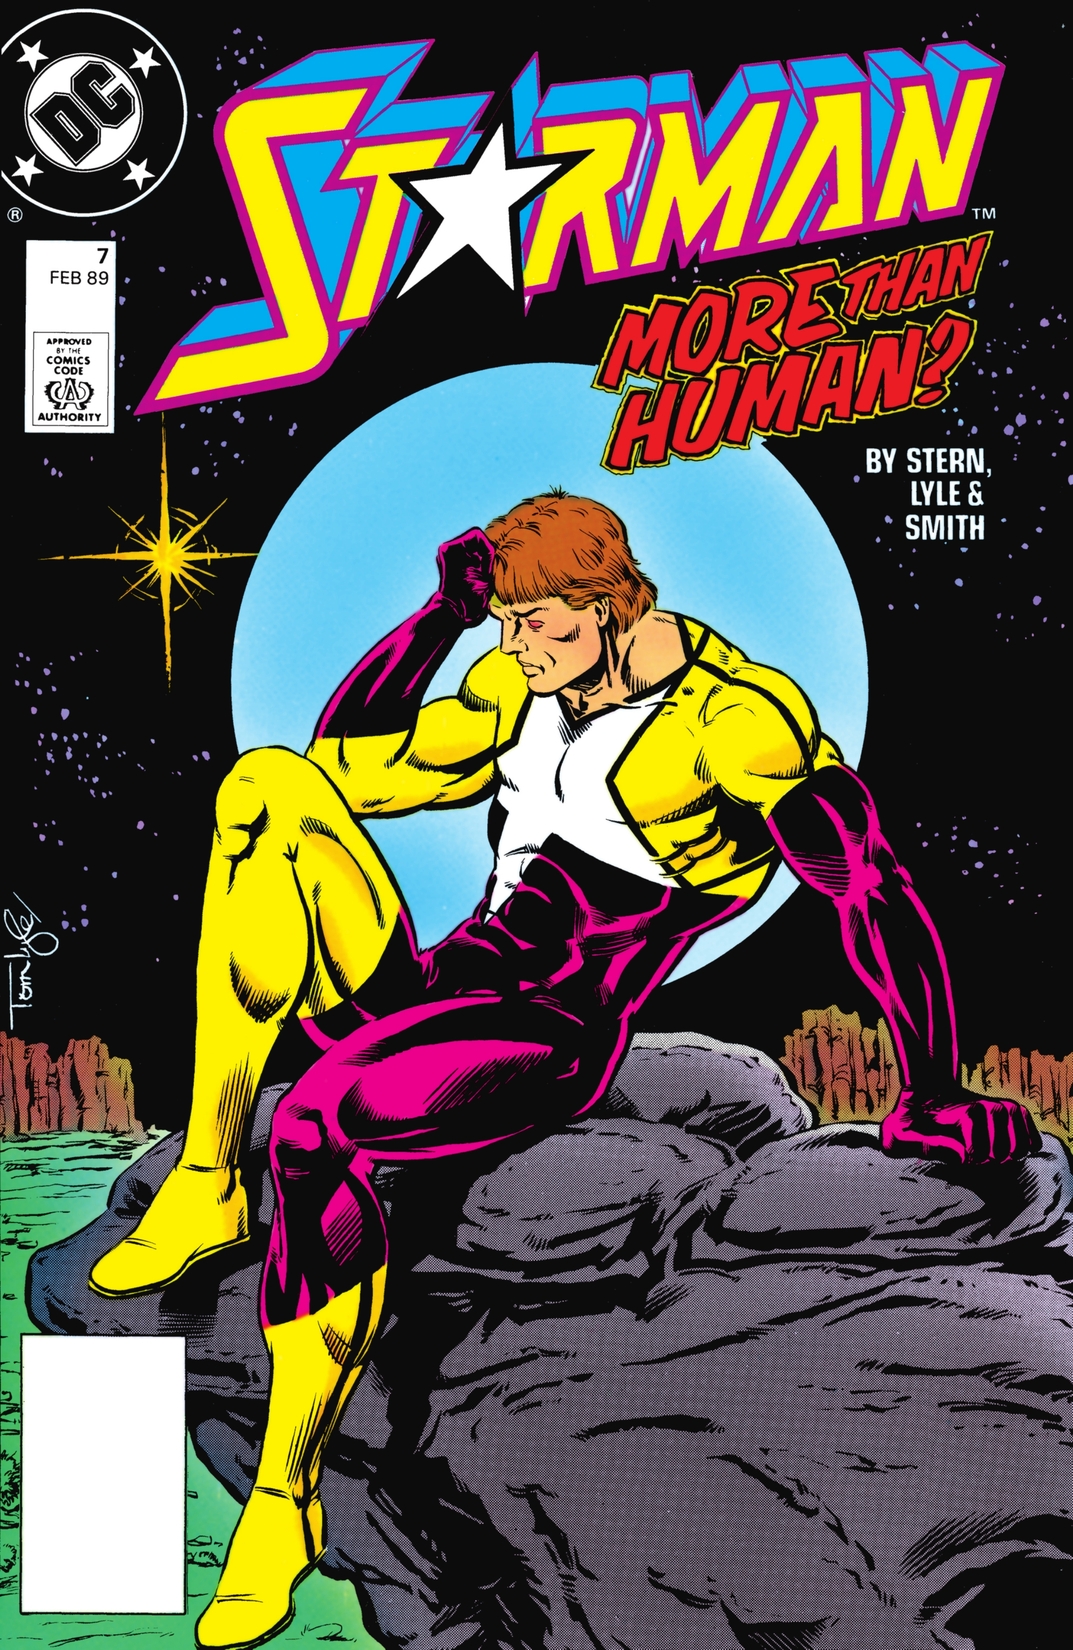 Starman (1988-1992) #7 preview images